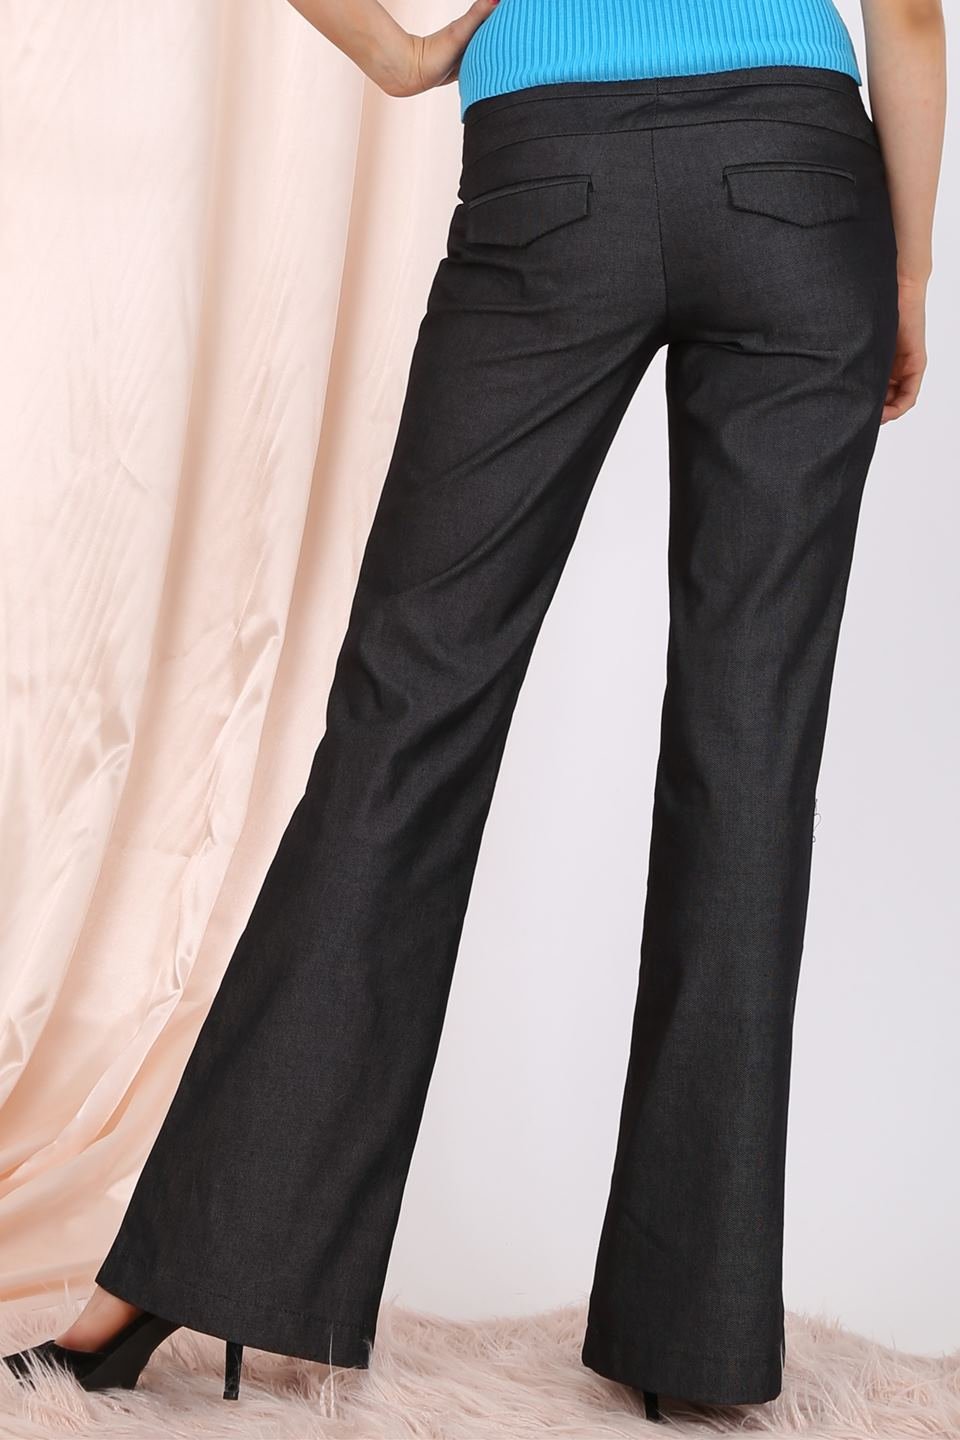 MISS PINKI Brynlee tailored work pants